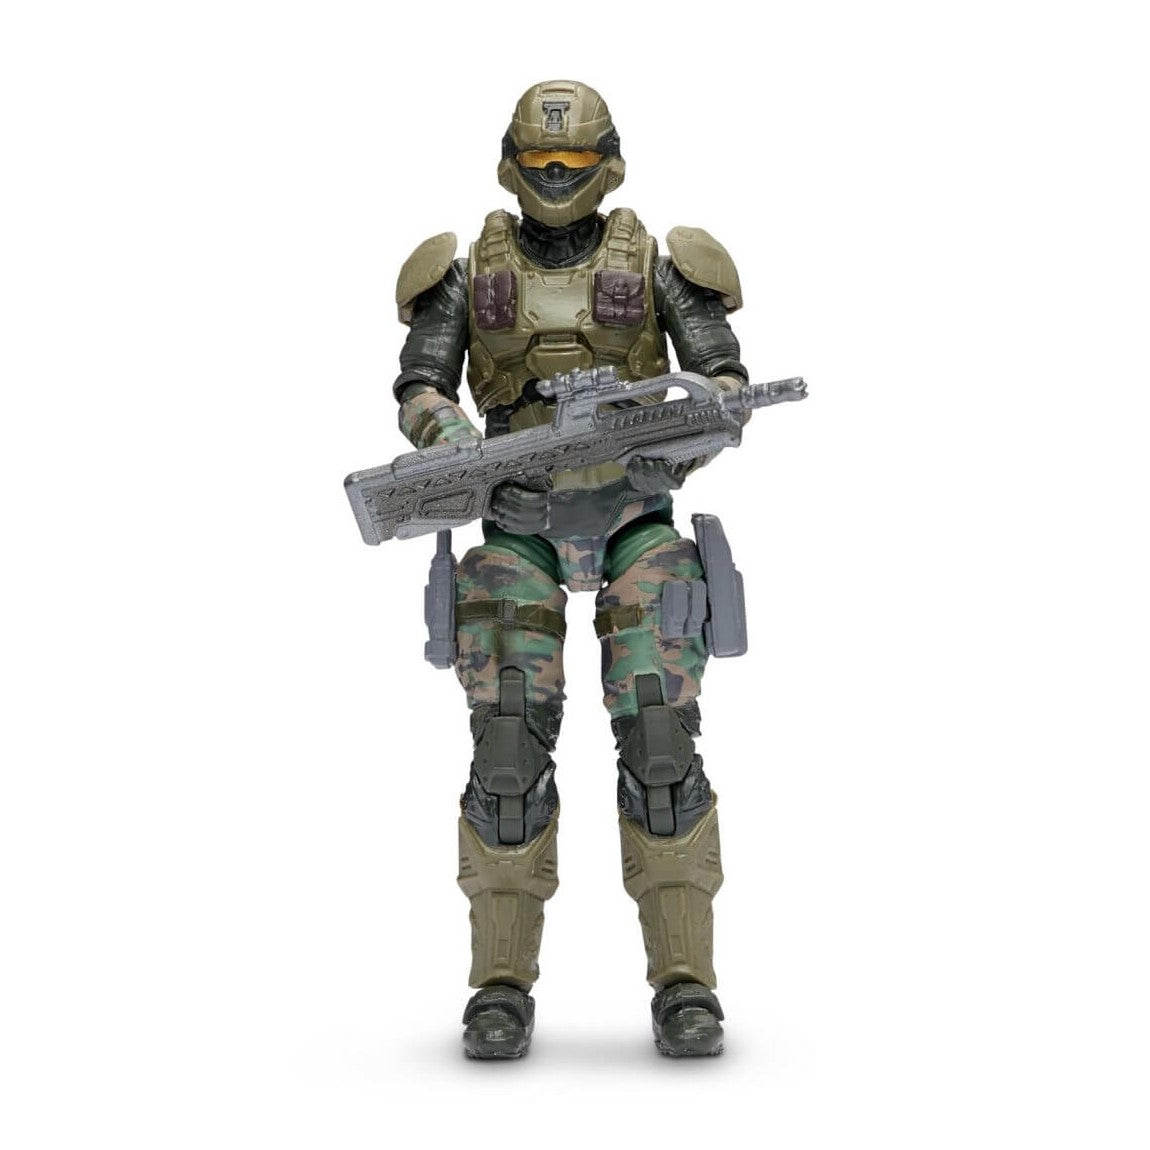 Halo Infinite 4" UNSC Marine and Grunt Conscript Action Figure 2 Pack-3